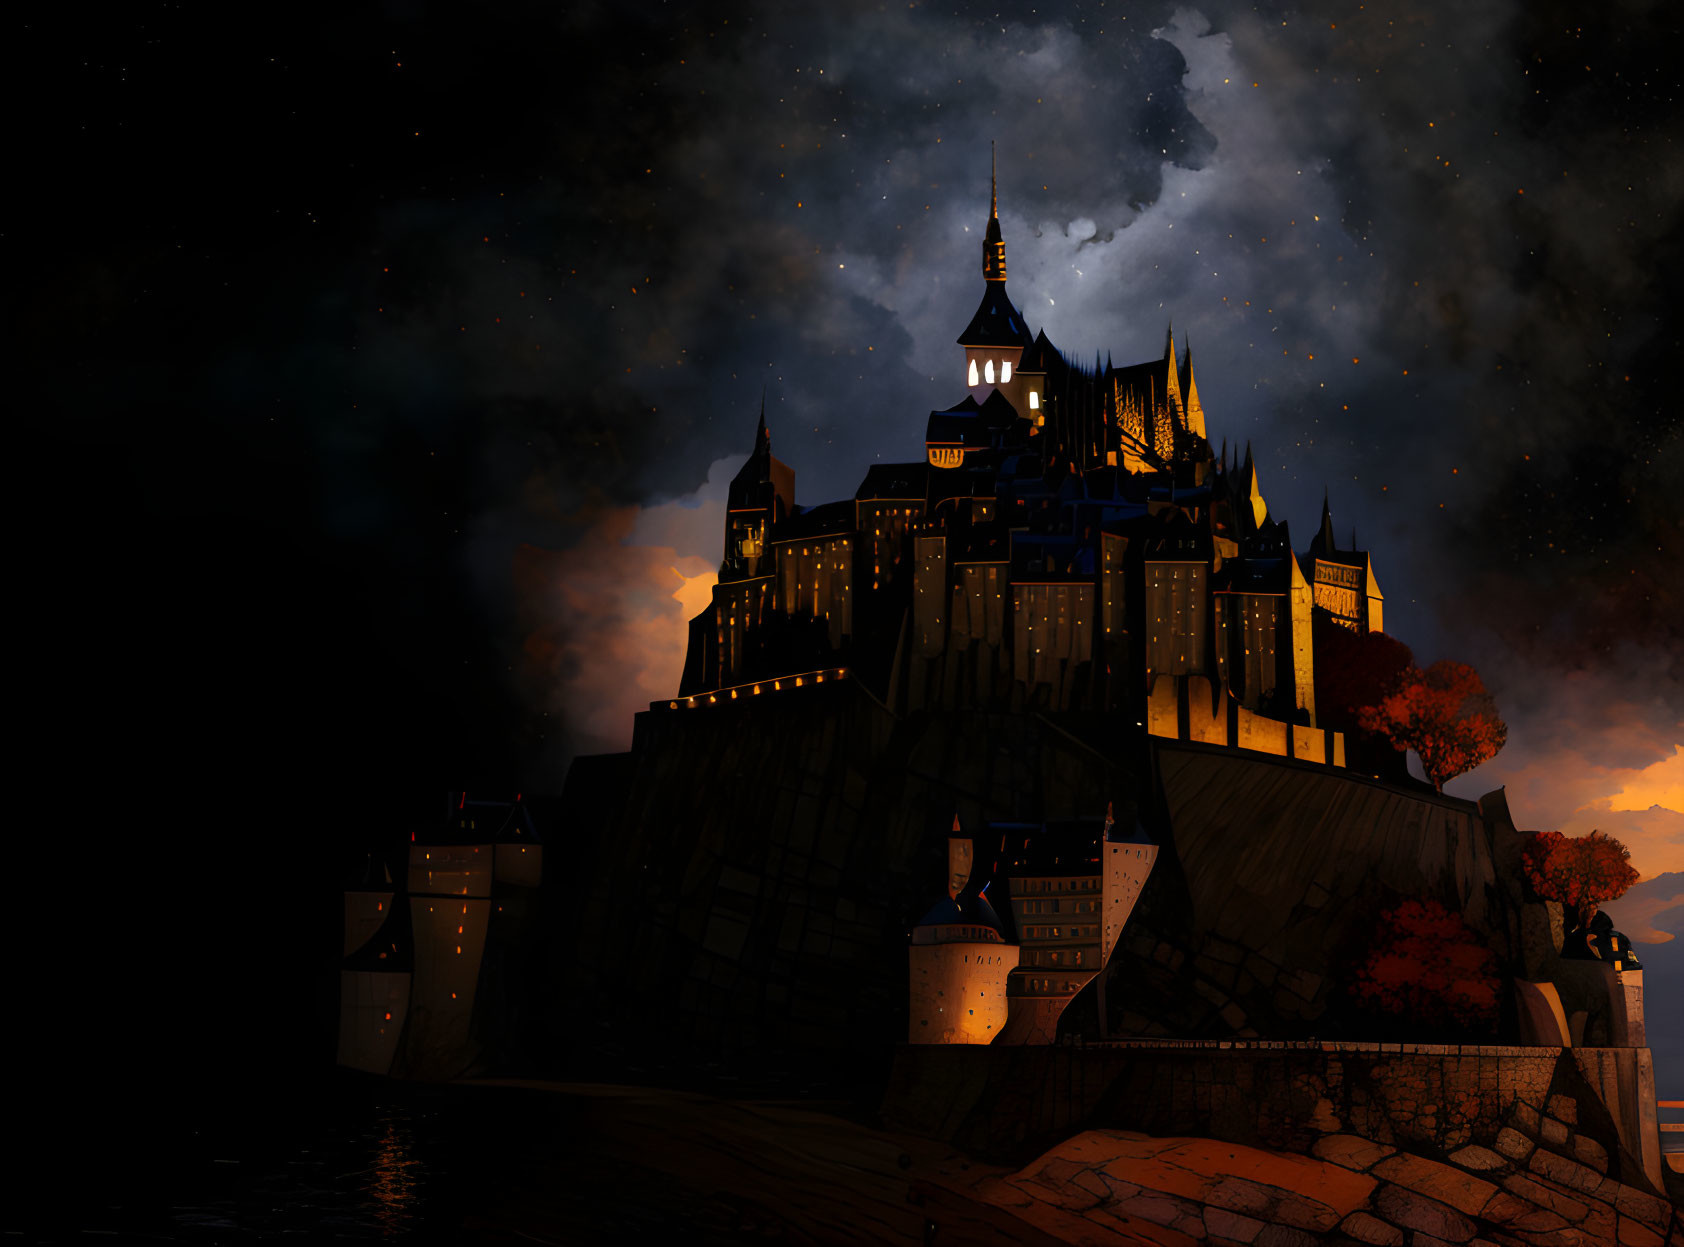 Majestic castle on rocky cliff at night with glowing windows